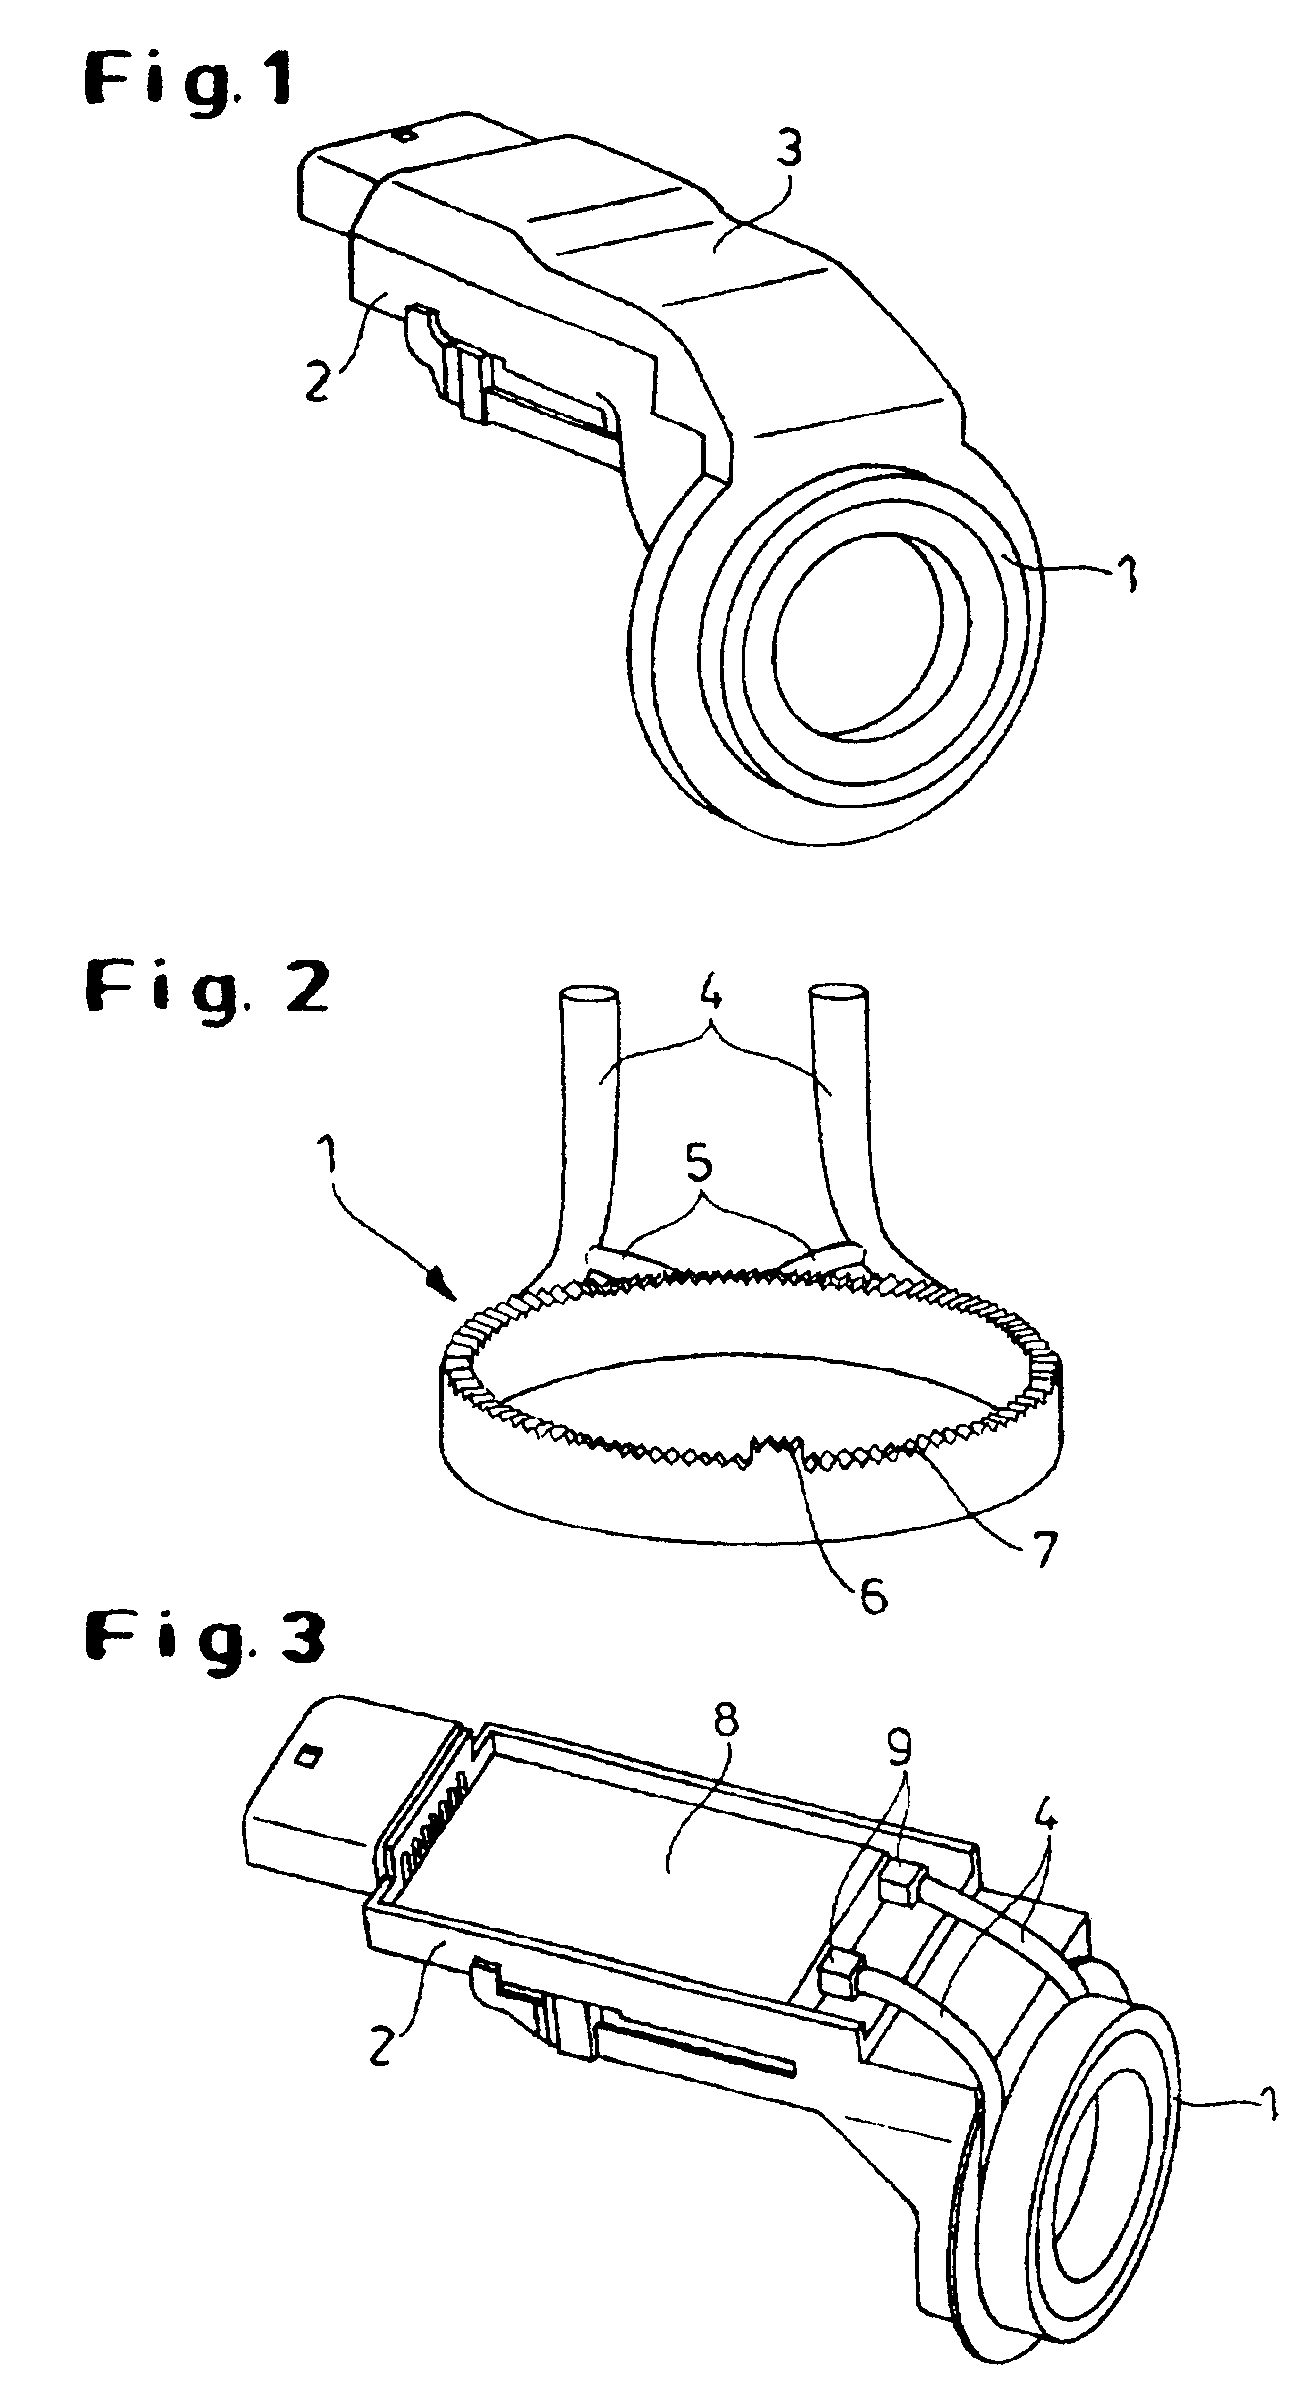 Lighting arrangement for the ignition lock of a motor vehicle